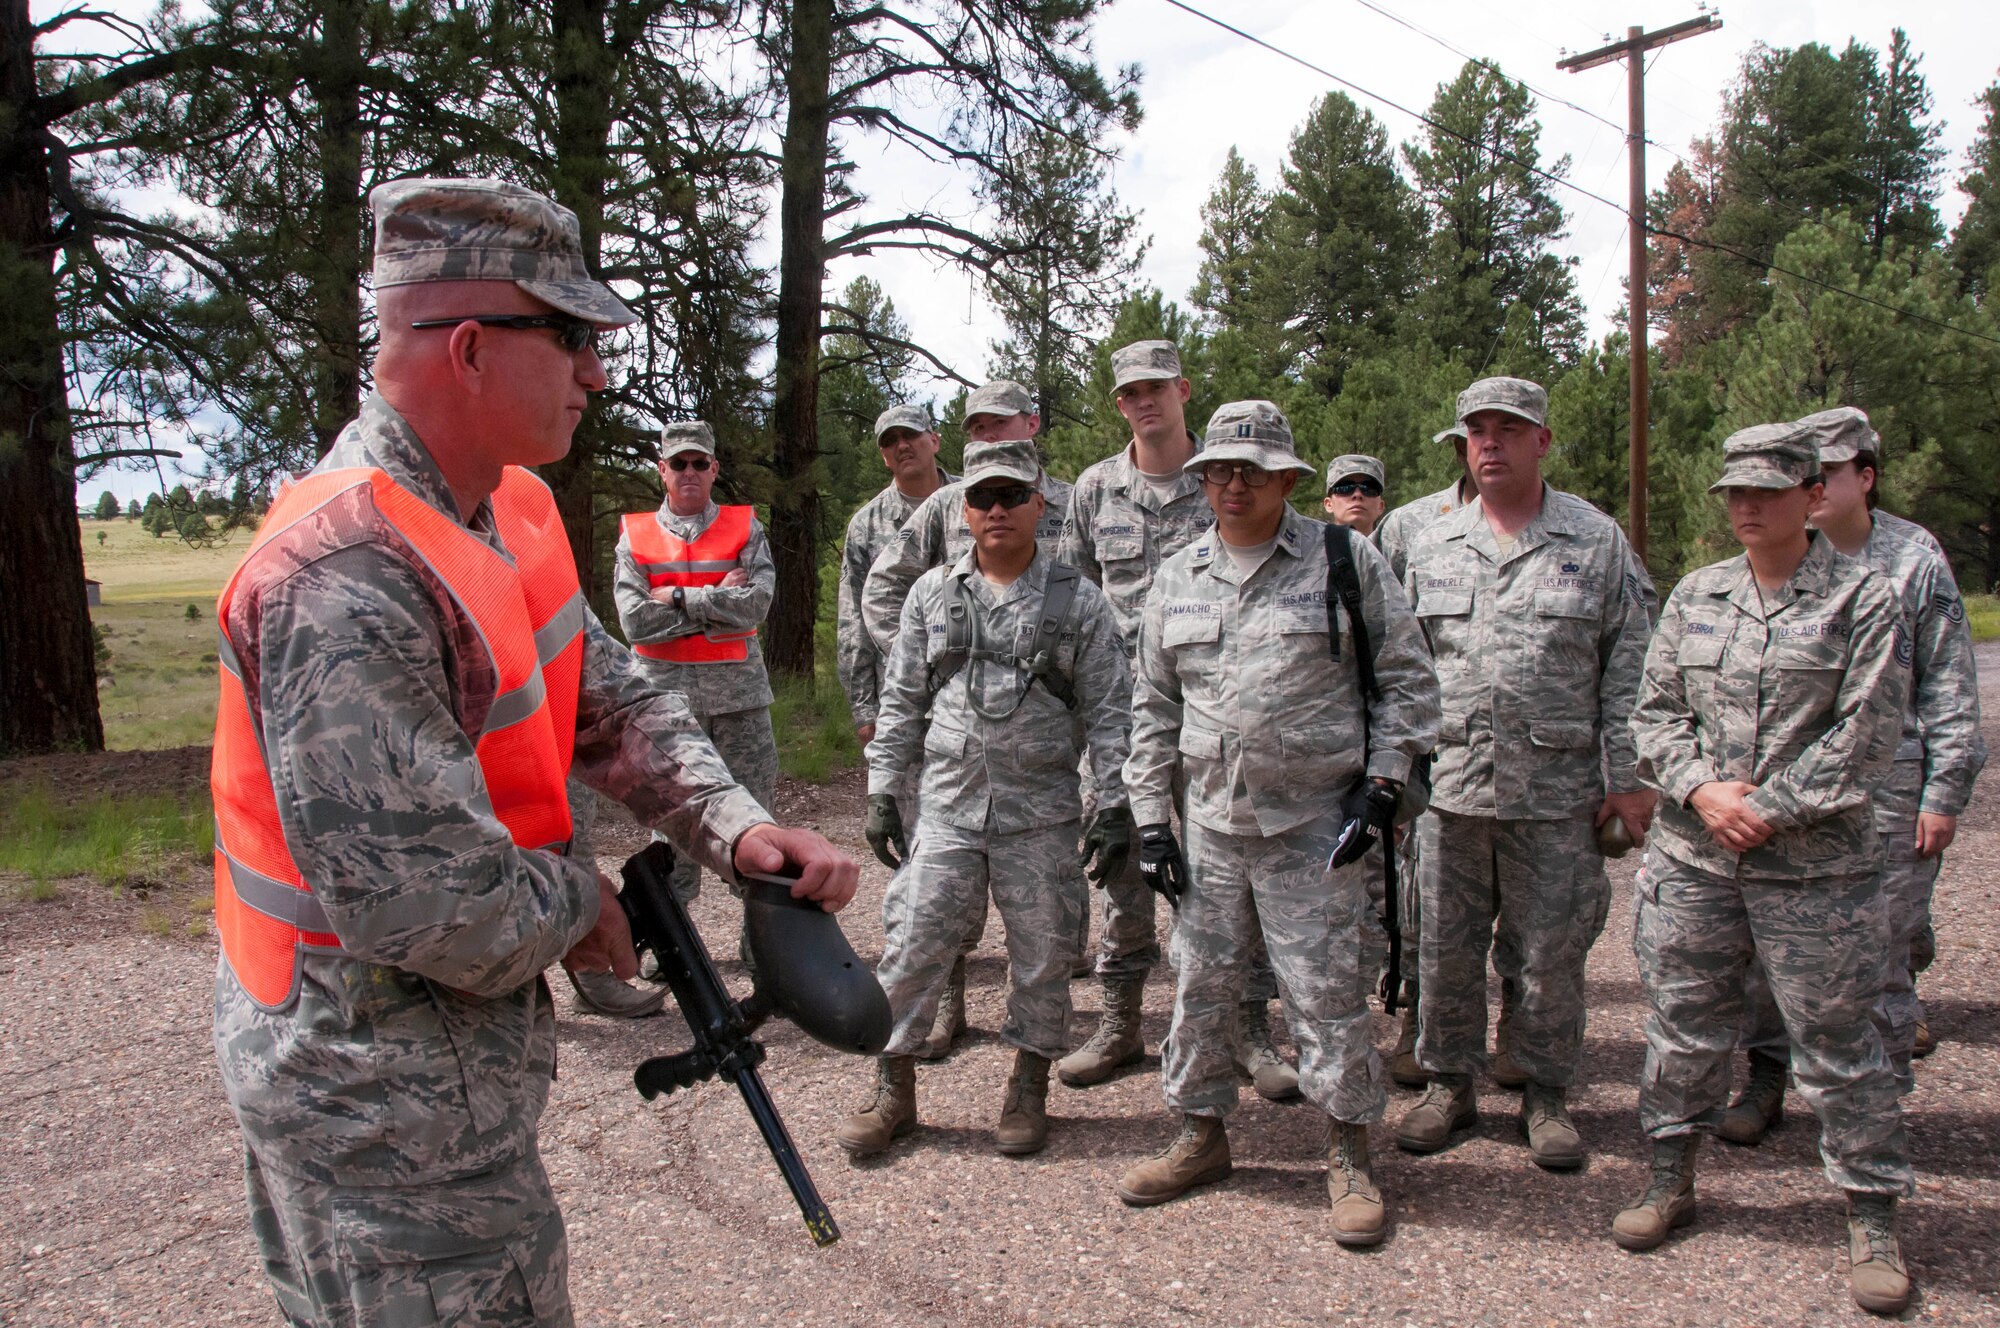 Lt. Col. Gregory Bliss instructs 162nd Wing members on the proper use of a paintball gun prior to beginning the care-under-fire exercise during the final day of training at the Camp Navajo Collective Training Center Aug. 11-15. (U.S. Air National Guard photo by 2nd Lt. Lacey Roberts)